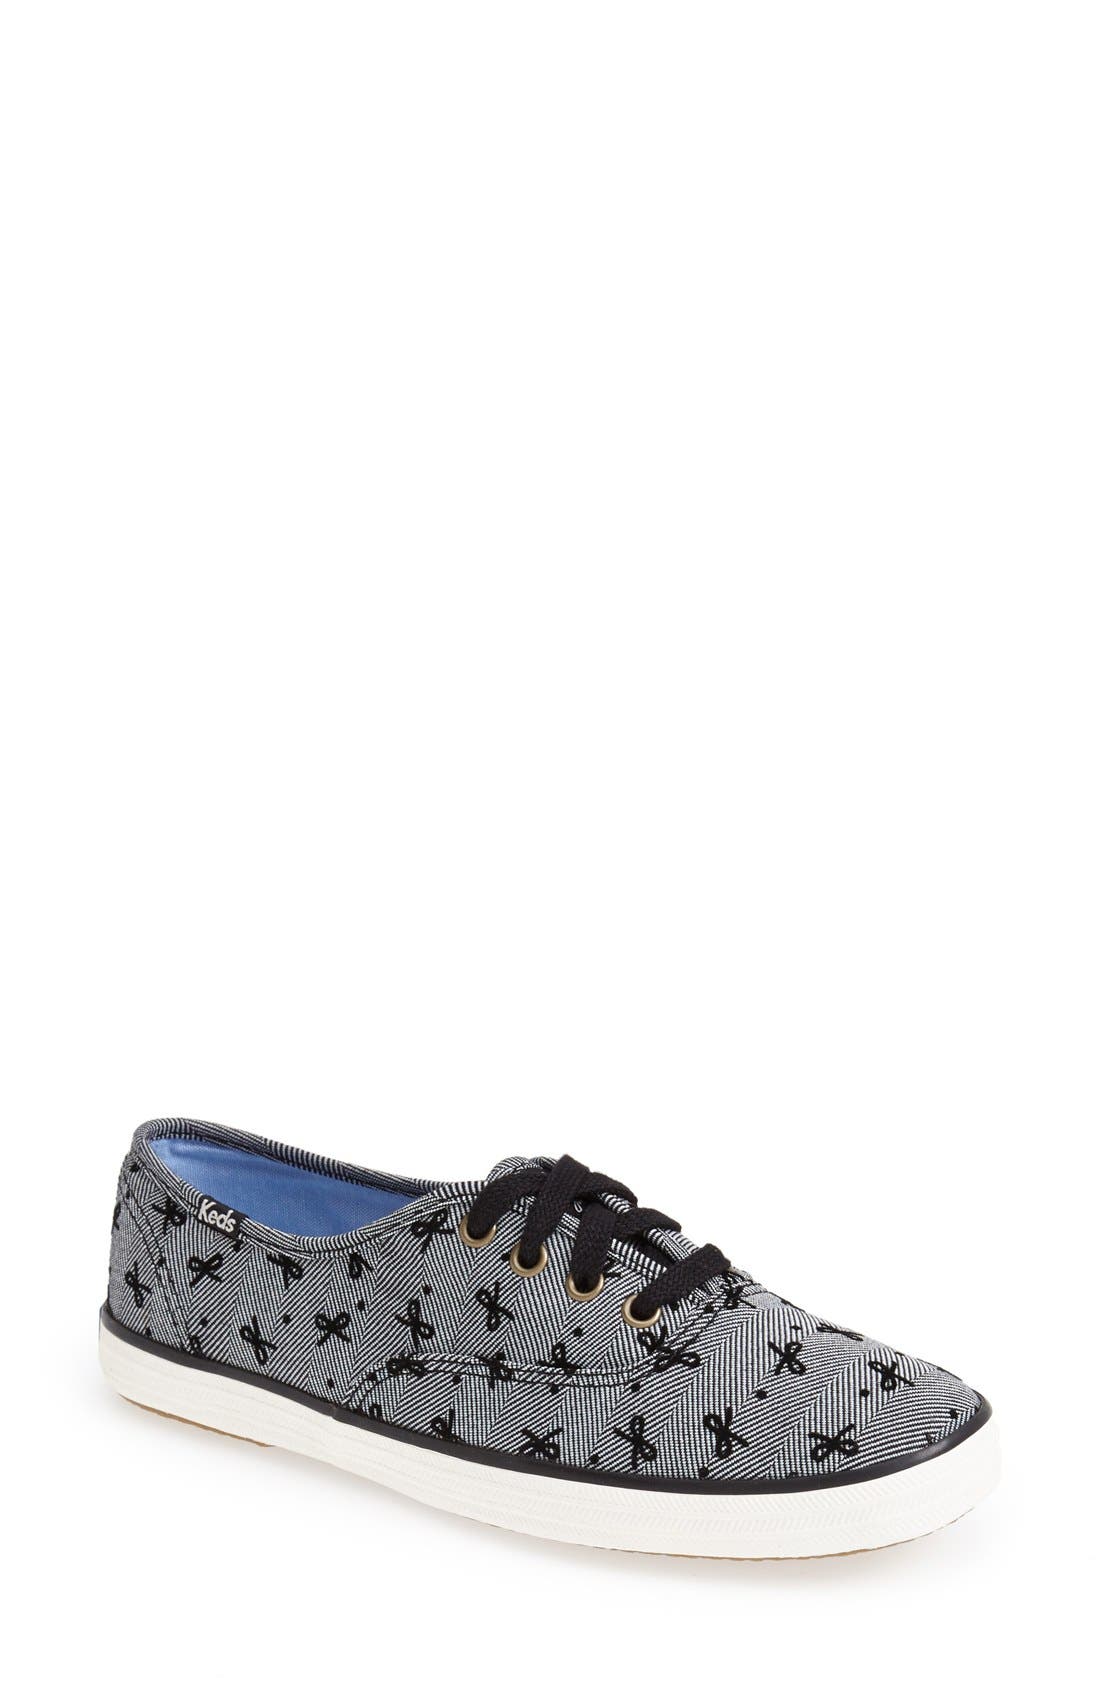 keds with bows